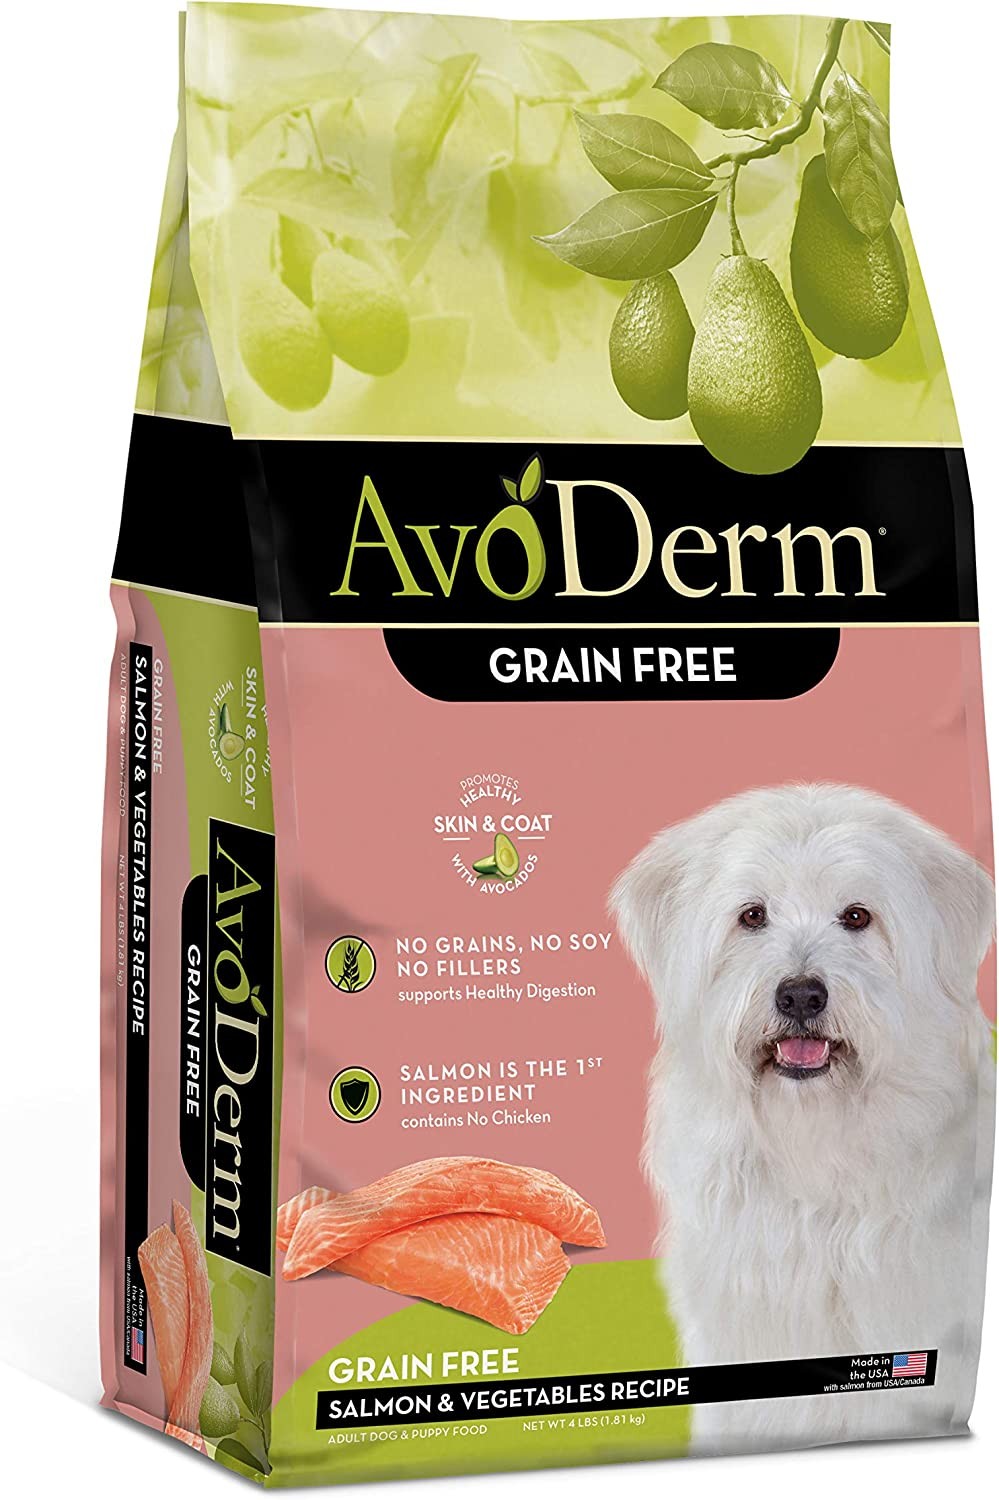 Dry & Wet Dog Food, Grain Free, Salmon & Vegetables Recipe, Seafood, 4 Pounds